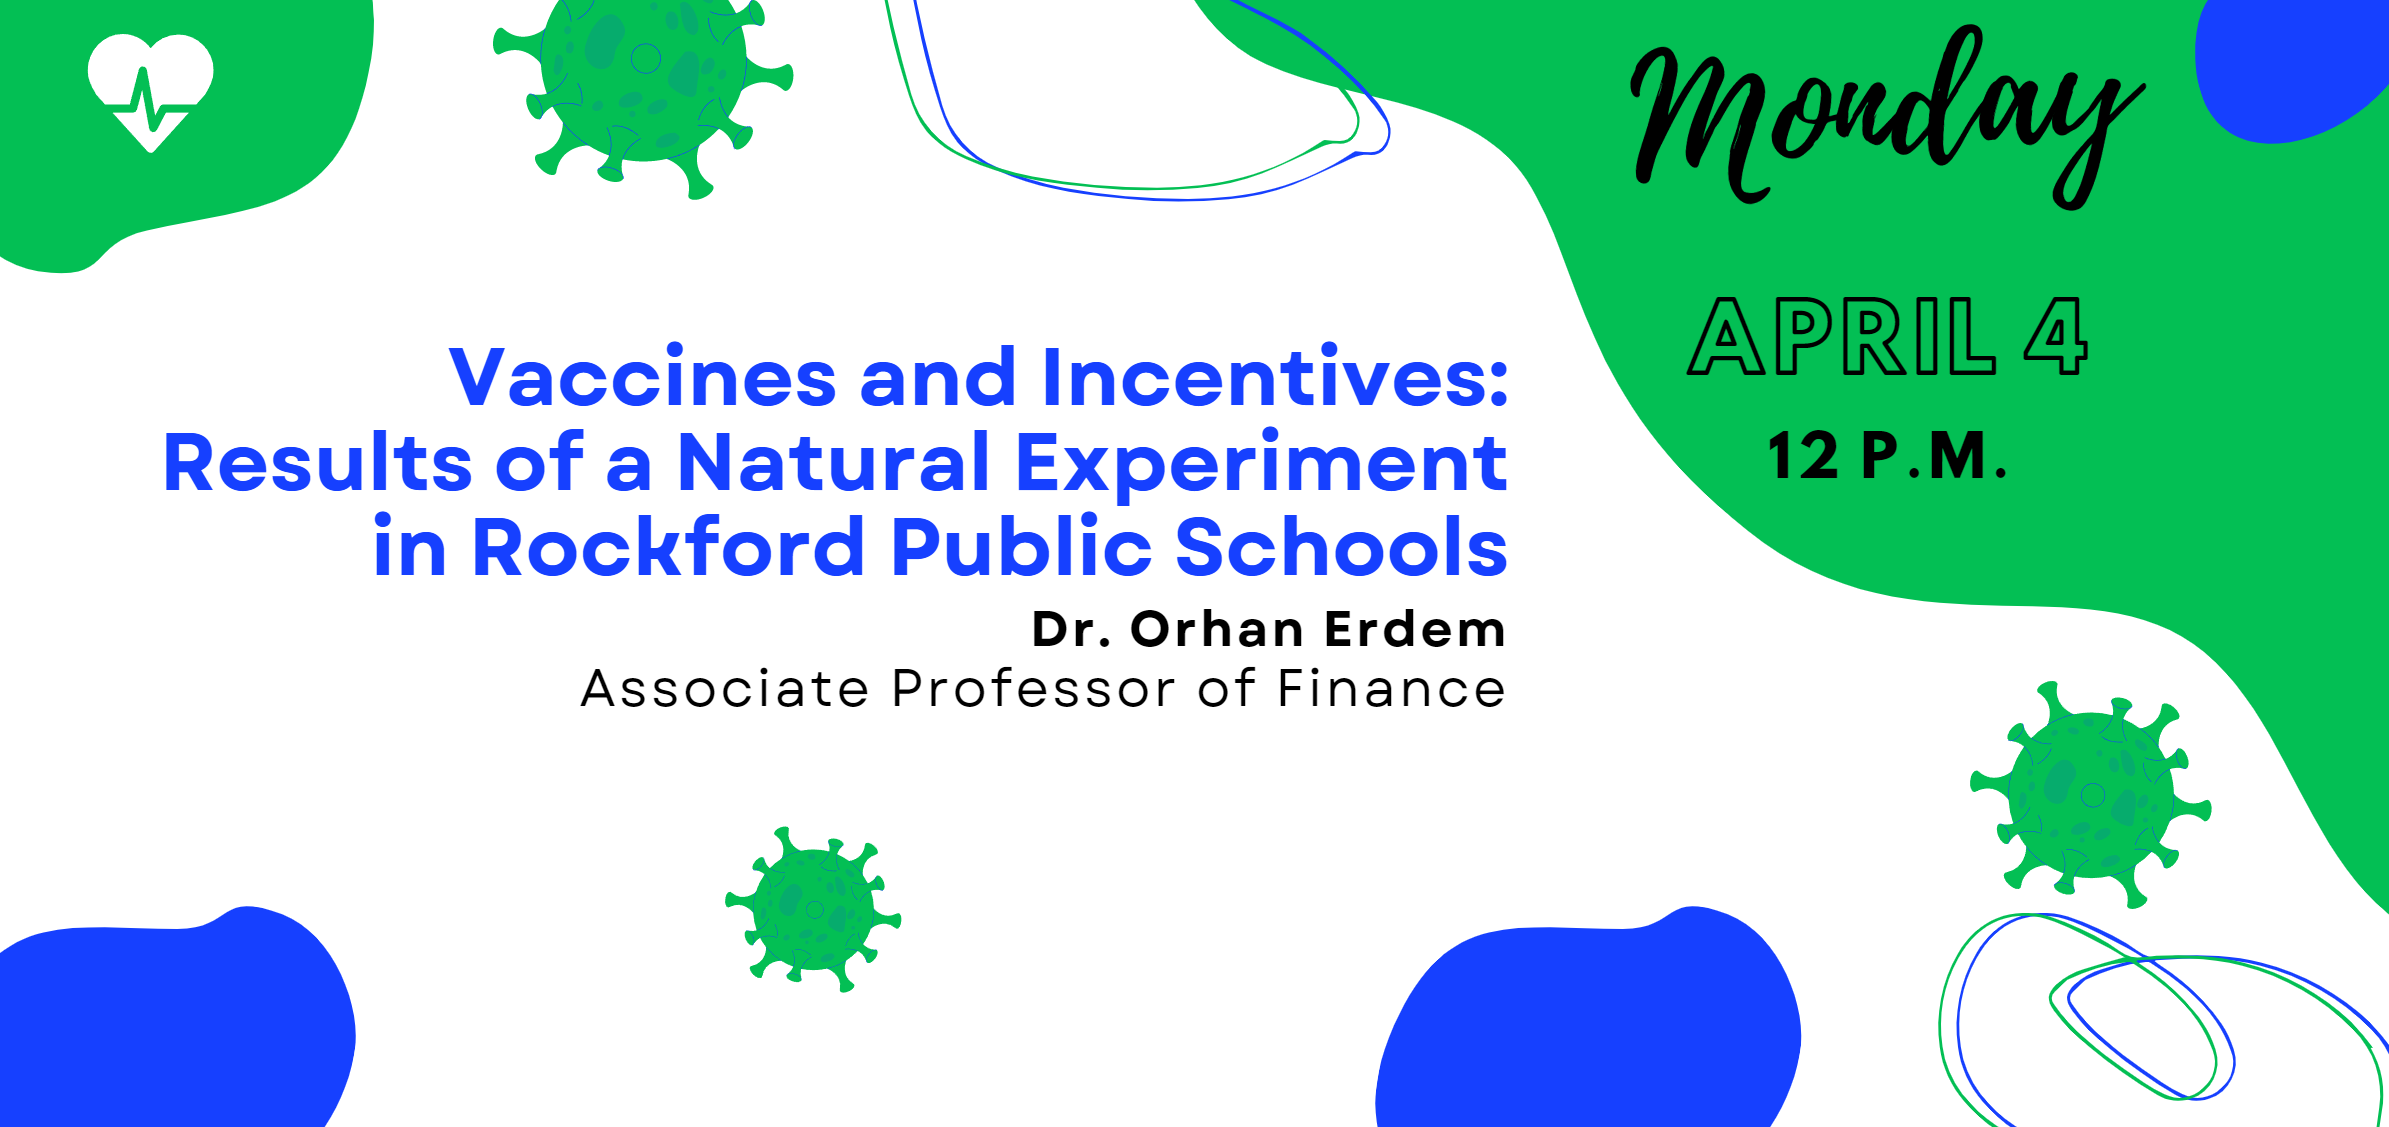 Image for Spring 2022 Brown Bag Series presentation:  “Vaccines and Incentives: Results of a Natural Experiment in Rockford Public Schools.” webinar